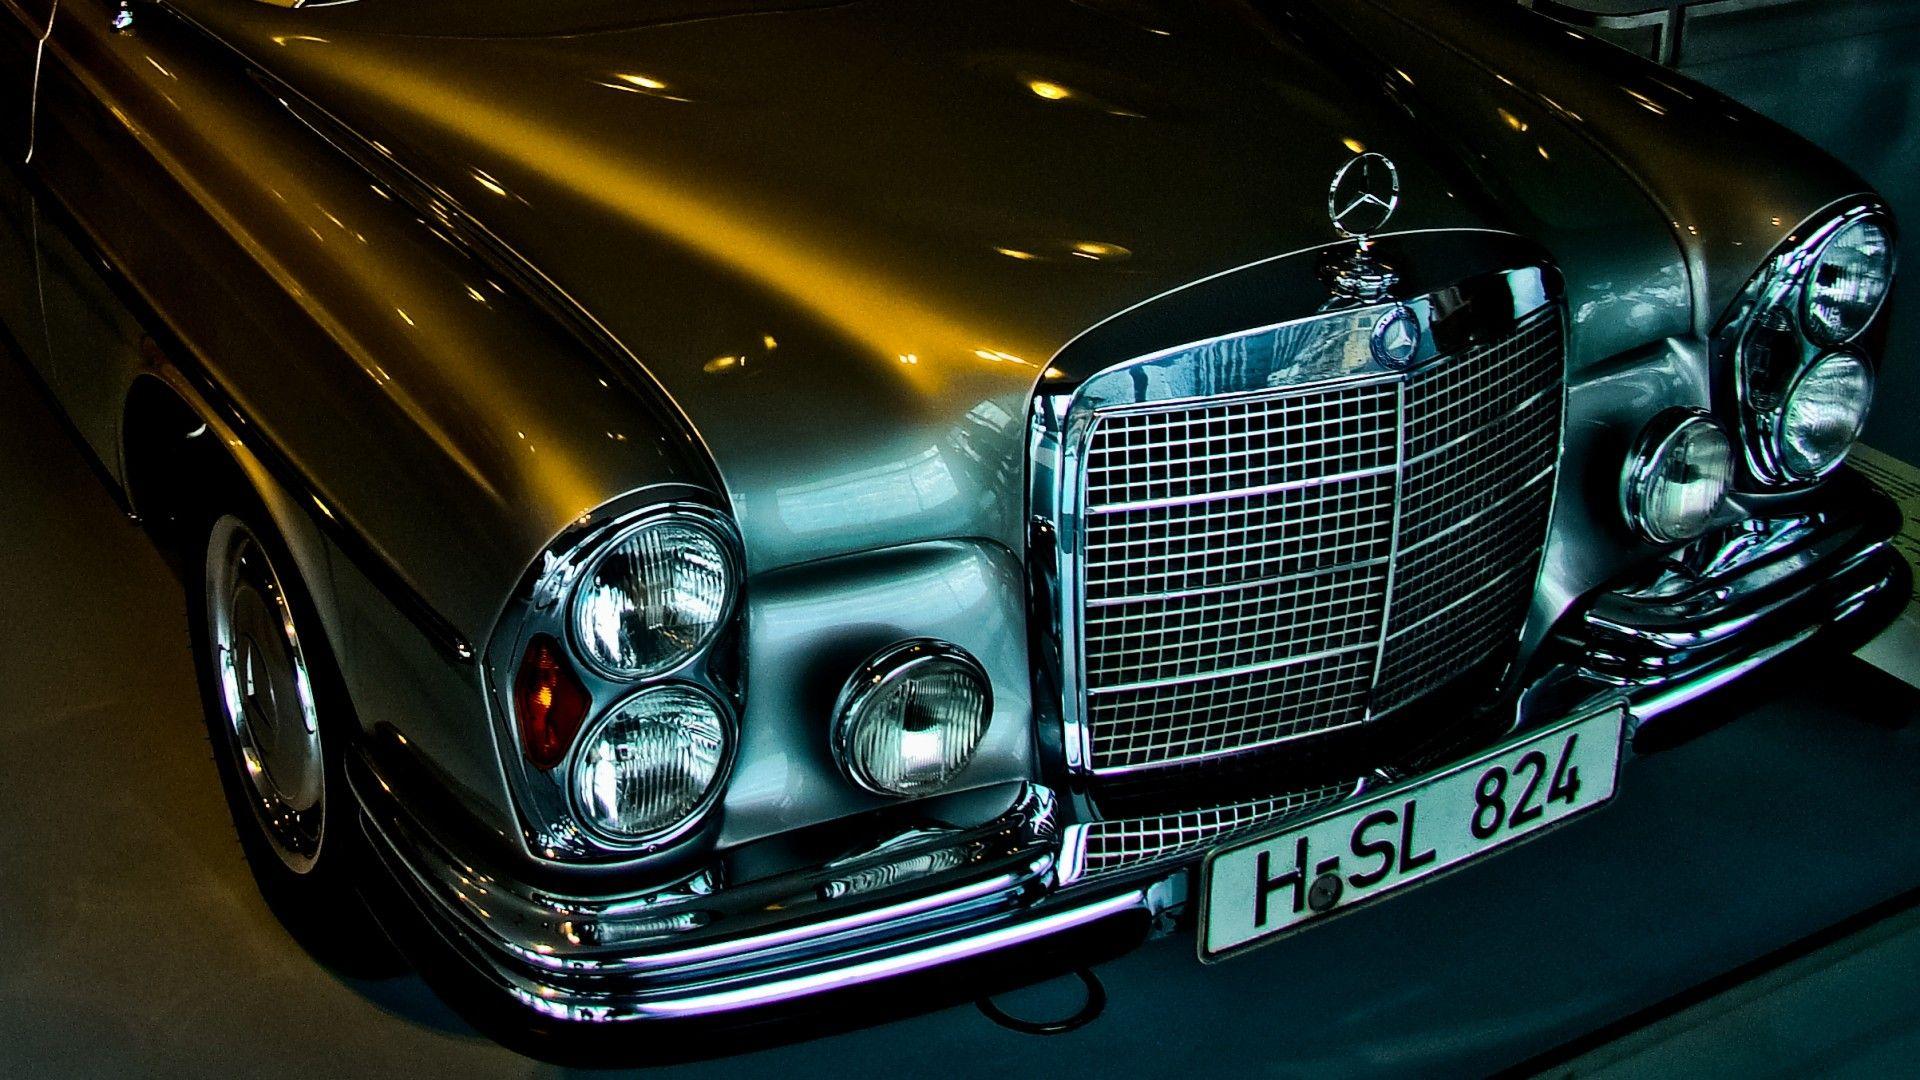 Lights, Cars, Vehicles, Old Cars, Mercedes Benz, Silver Cars